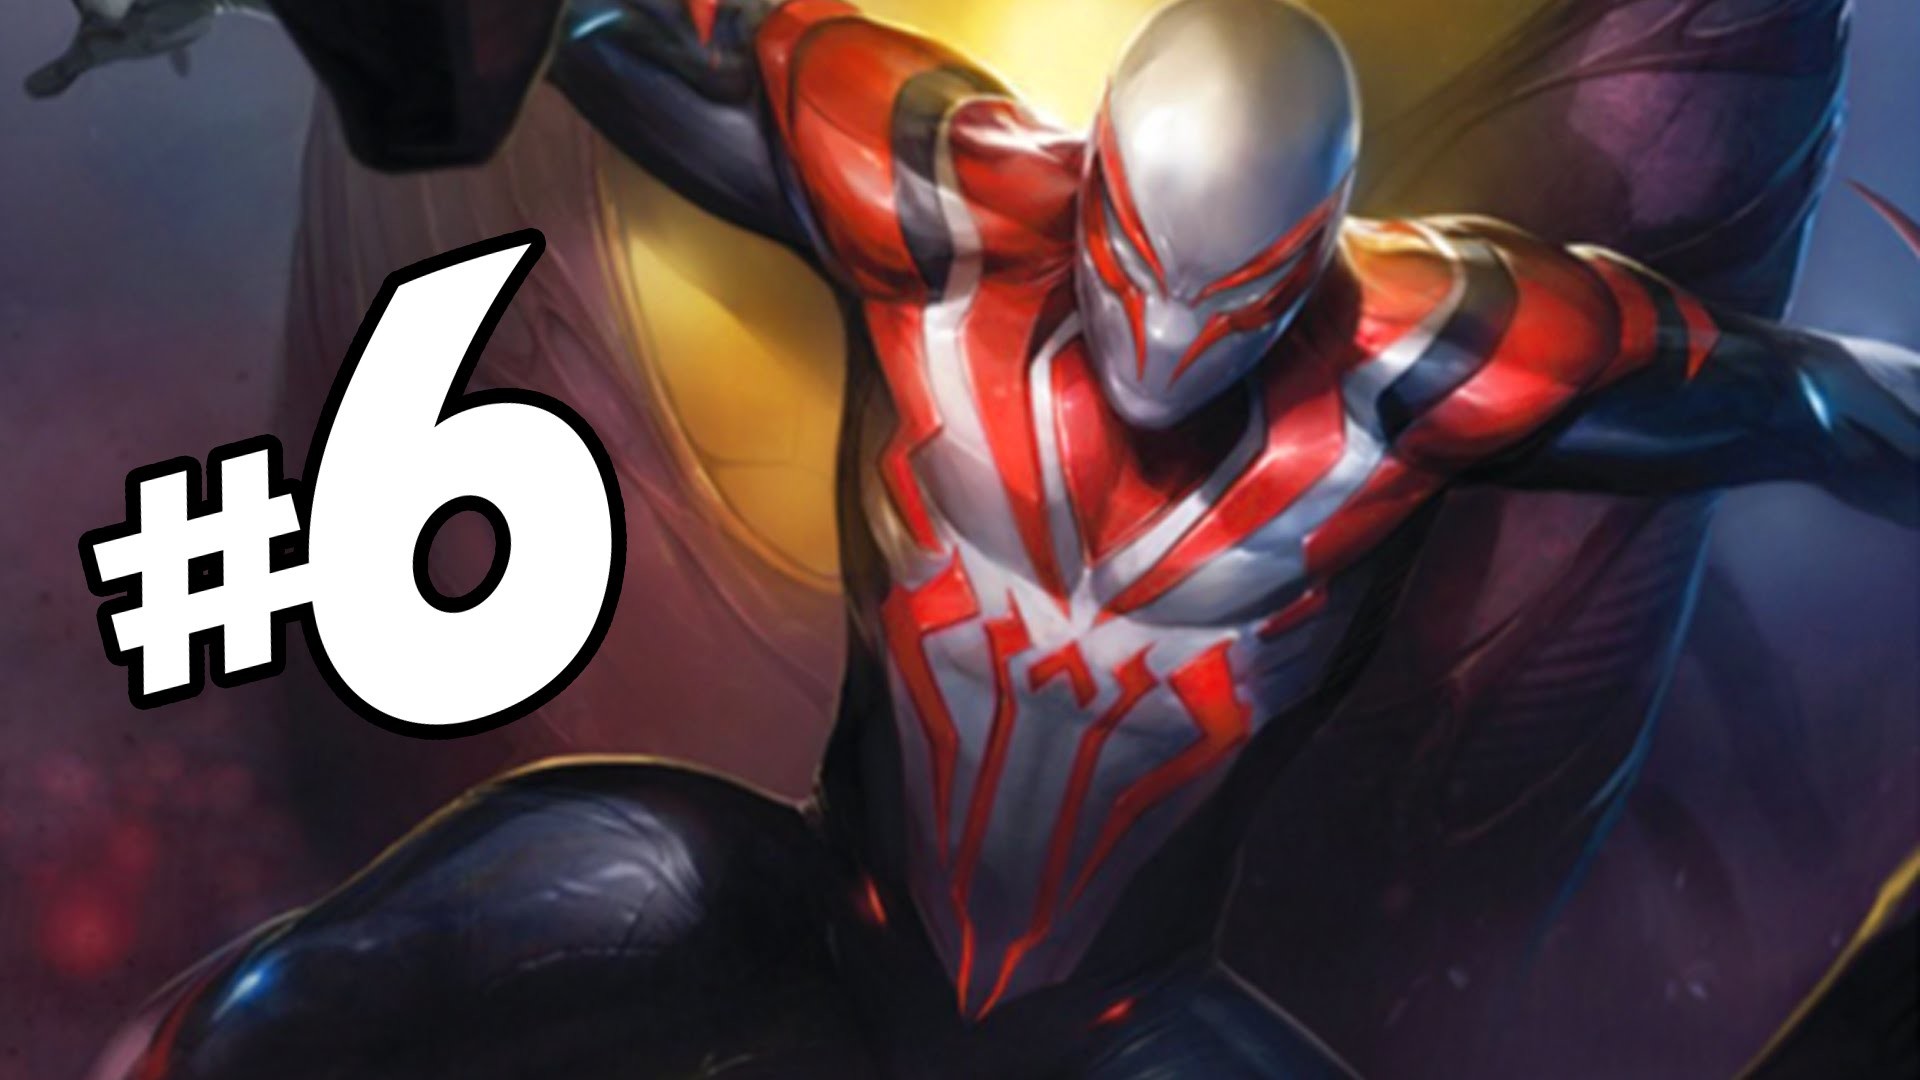 Spider-Man 2099 (All-New All-Different) Issue #6 Full Comic Review! (2016)  – YouTube